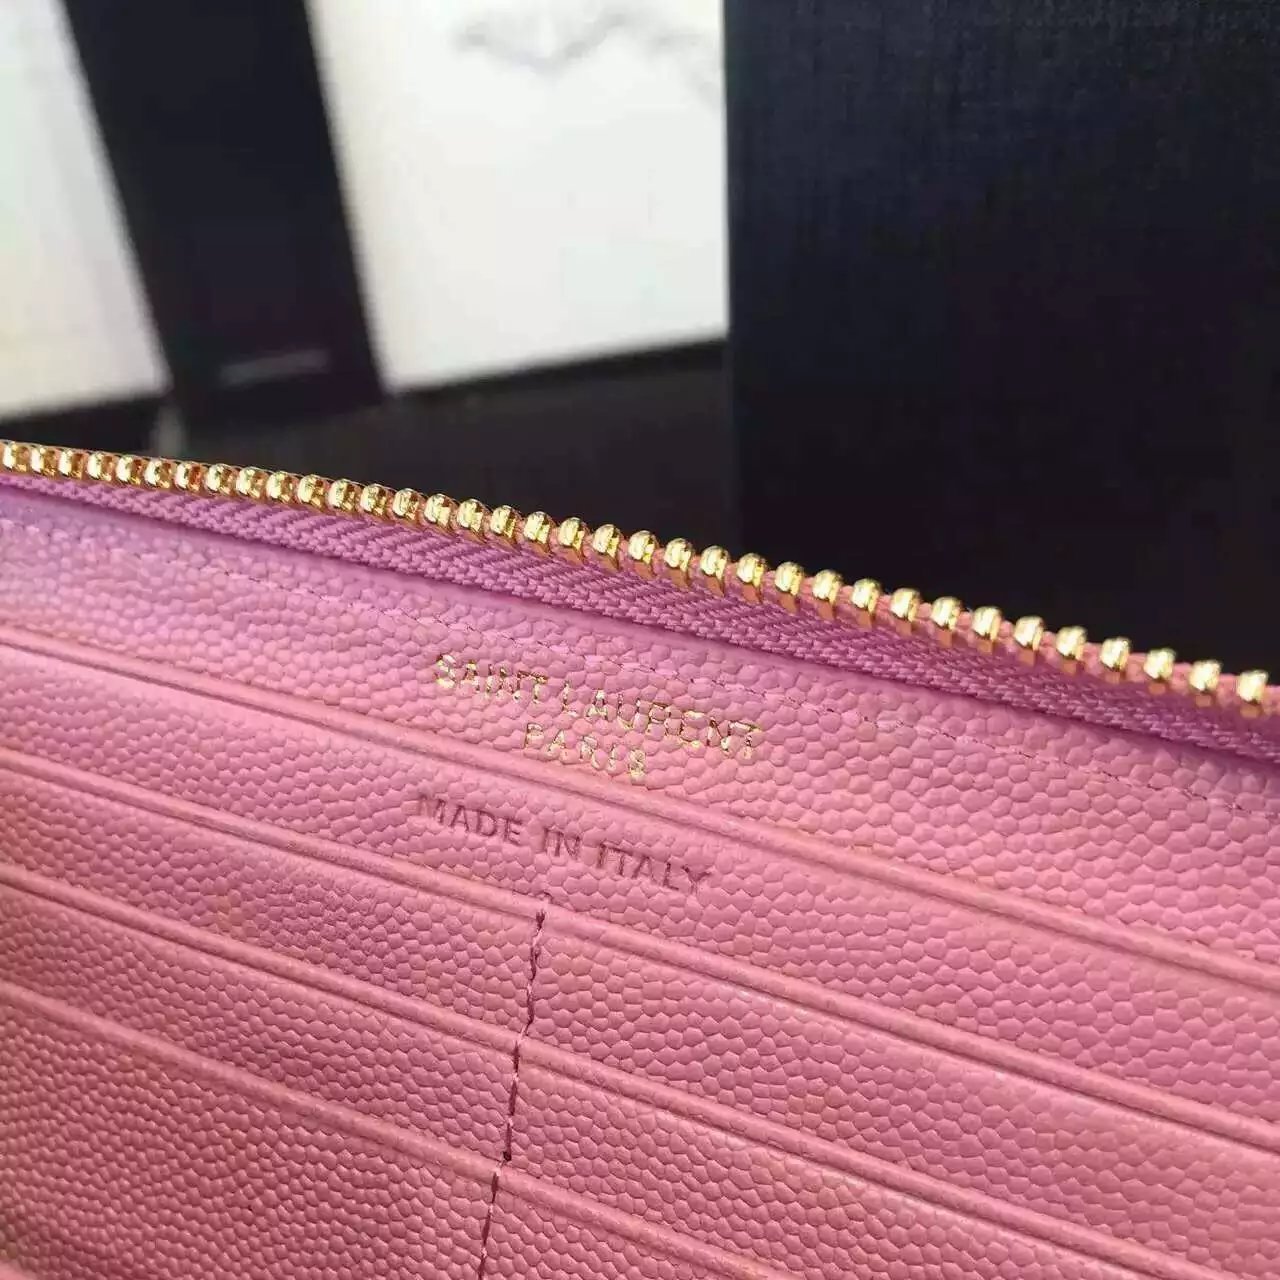 2016 Cheap YSL Out Sale with Free Shipping-Saint Laurent Monogram Zip Around Wallet in Pink Grain De Poudre Matelasse Textured Leather - Click Image to Close